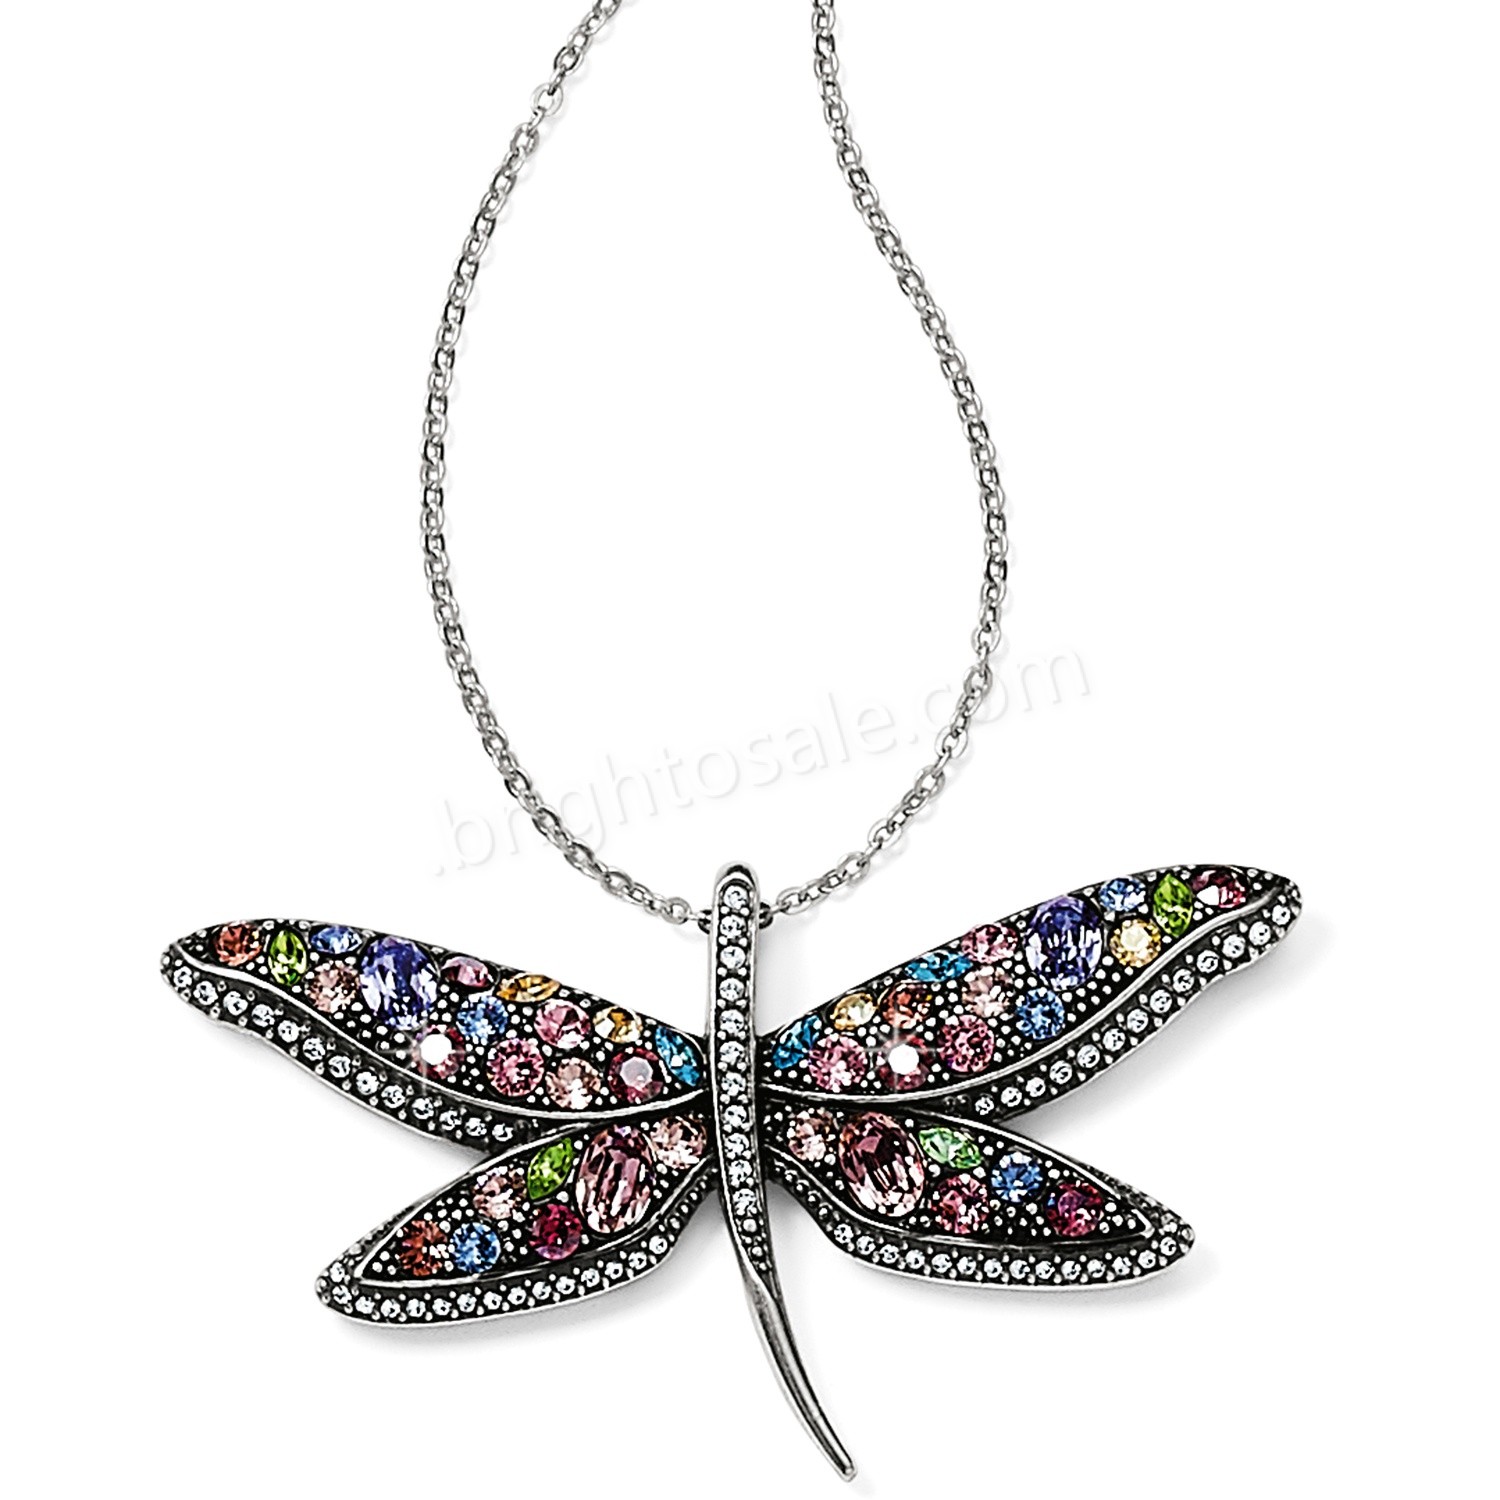 Brighton Collectibles & Online Discount Trust Your Journey Dragonfly Reversible Necklace - Brighton Collectibles & Online Discount Trust Your Journey Dragonfly Reversible Necklace